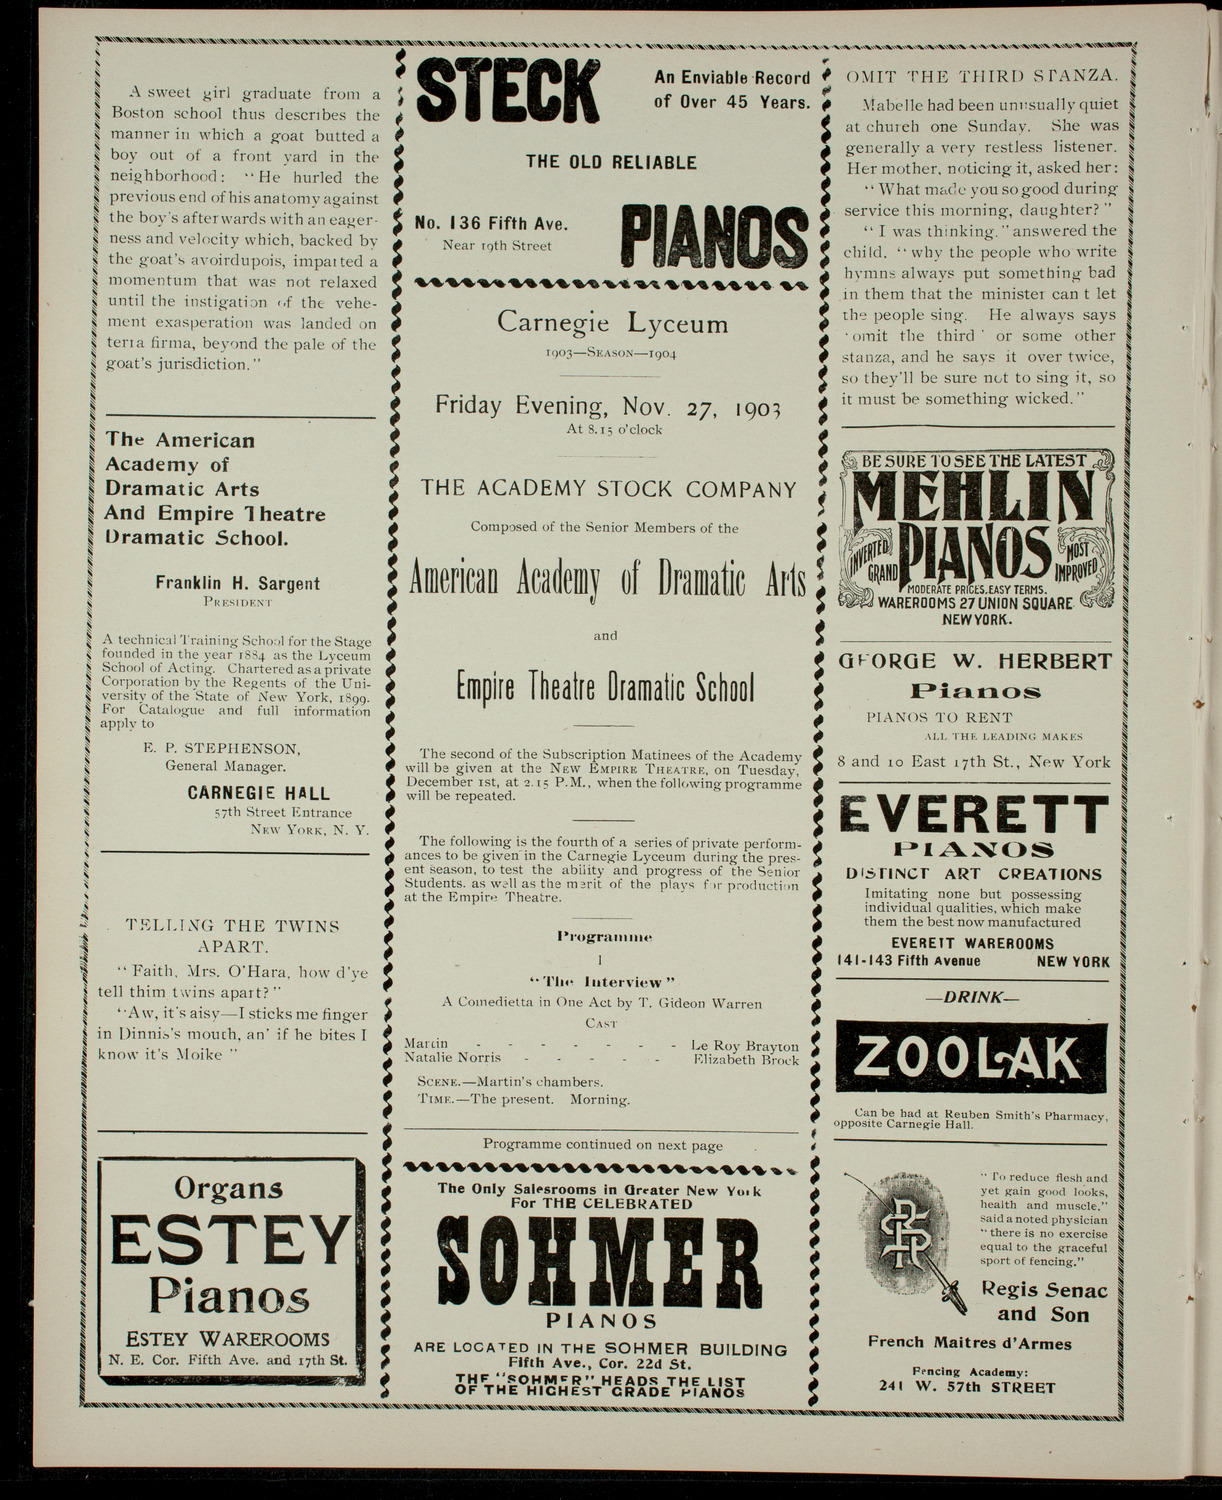 Academy Stock Company of the American Academy of Dramatic Arts/Empire Theatre Dramatic School, November 27, 1903, program page 2